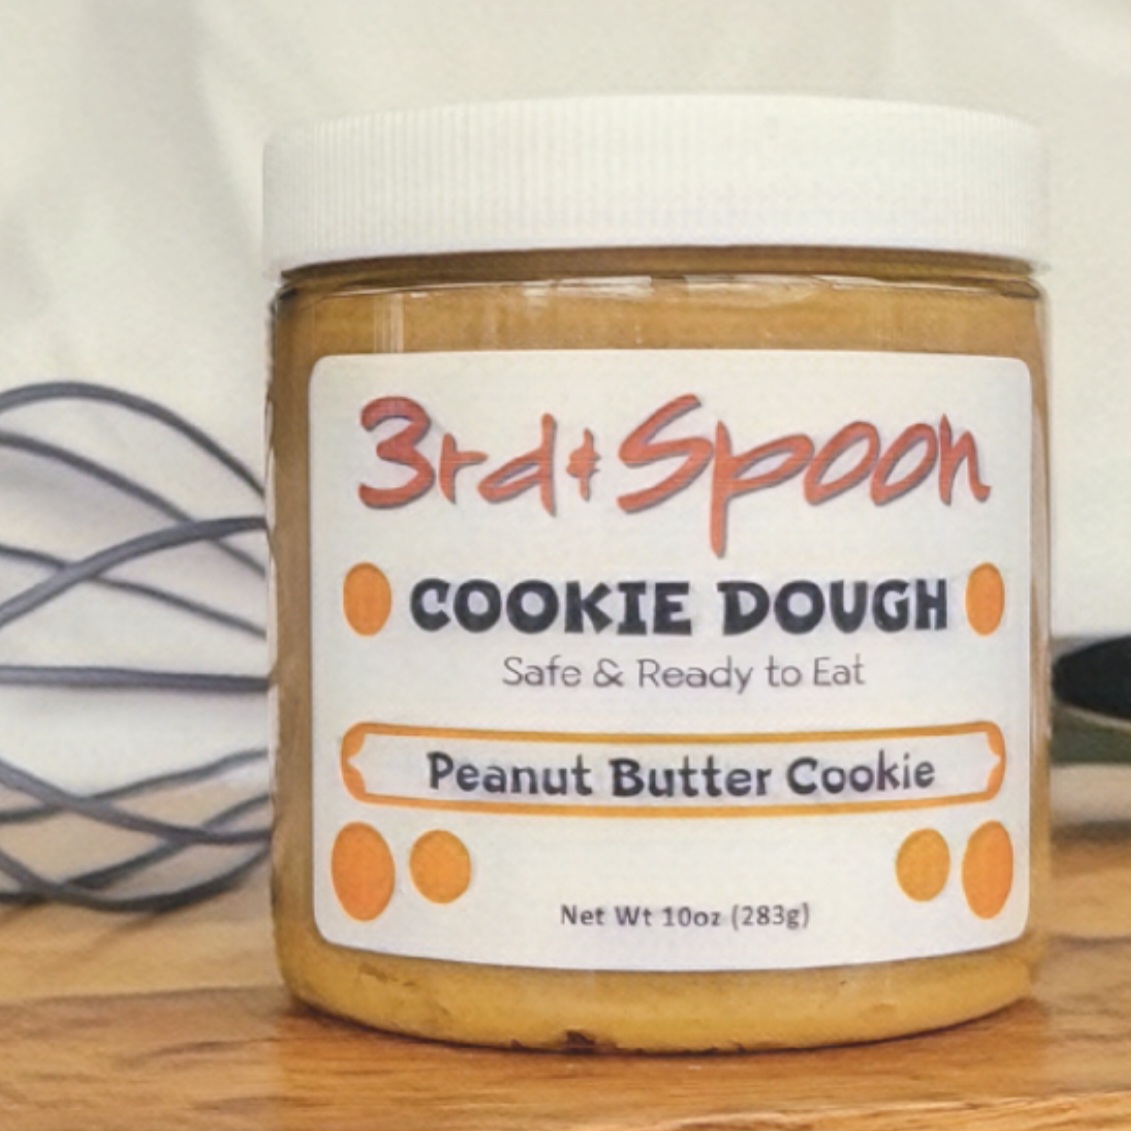 3rd & Spoon Ready To Eat Cookie Dough - 3rd & Spoon